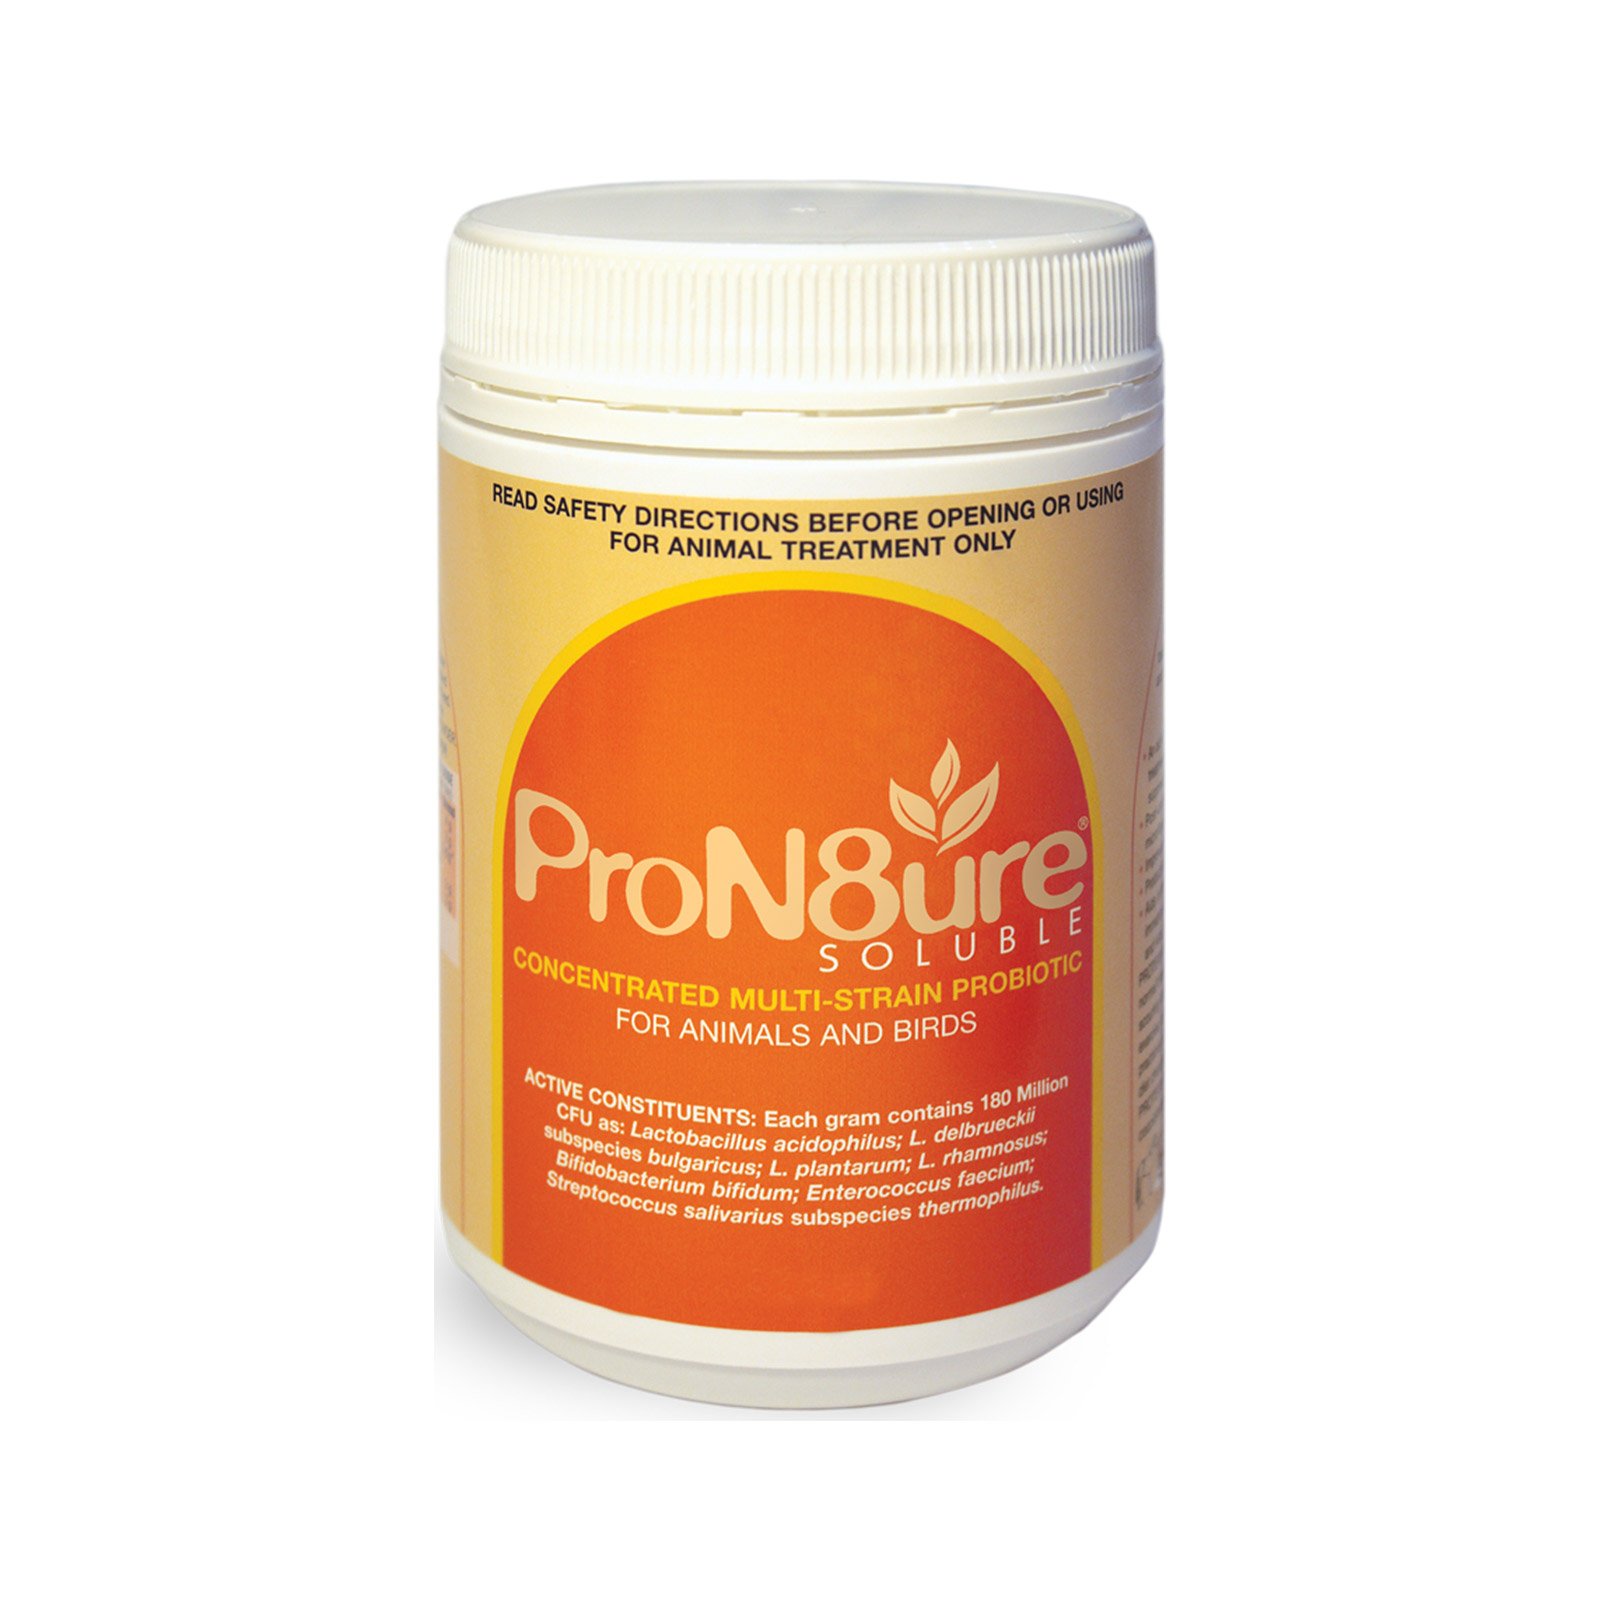 PRON8URE (PROTEXIN) SOLUBLE 